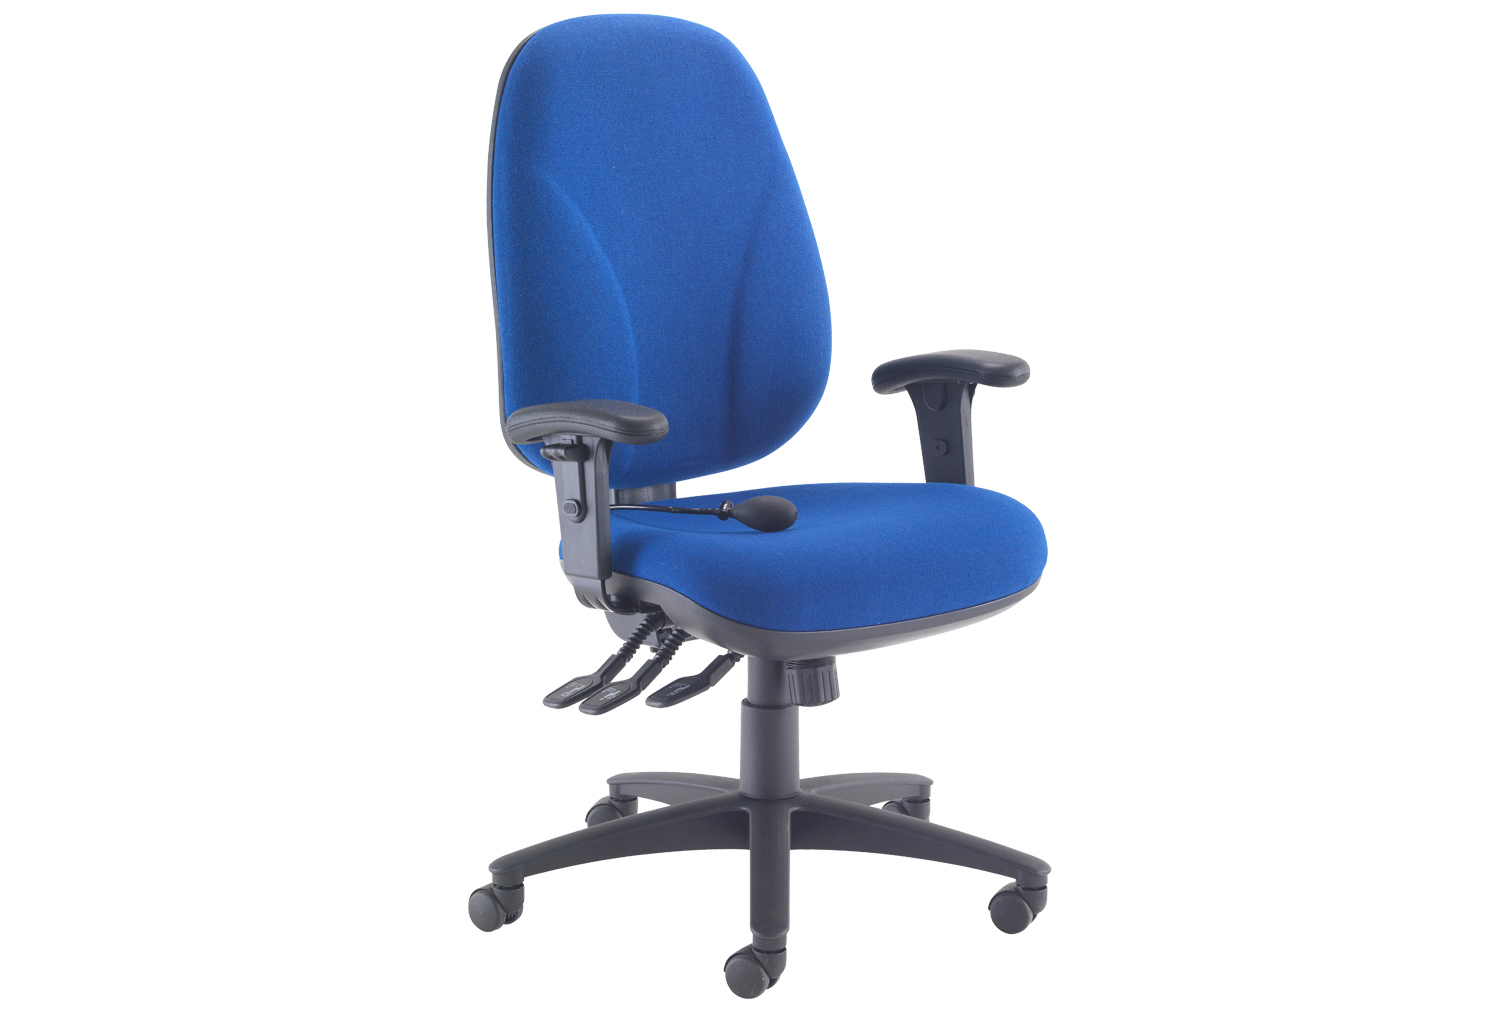 Orchid Deluxe Lumbar Pump Ergonomic Operator Office Chair With Height Adjustable Arms, Blue, Express Delivery